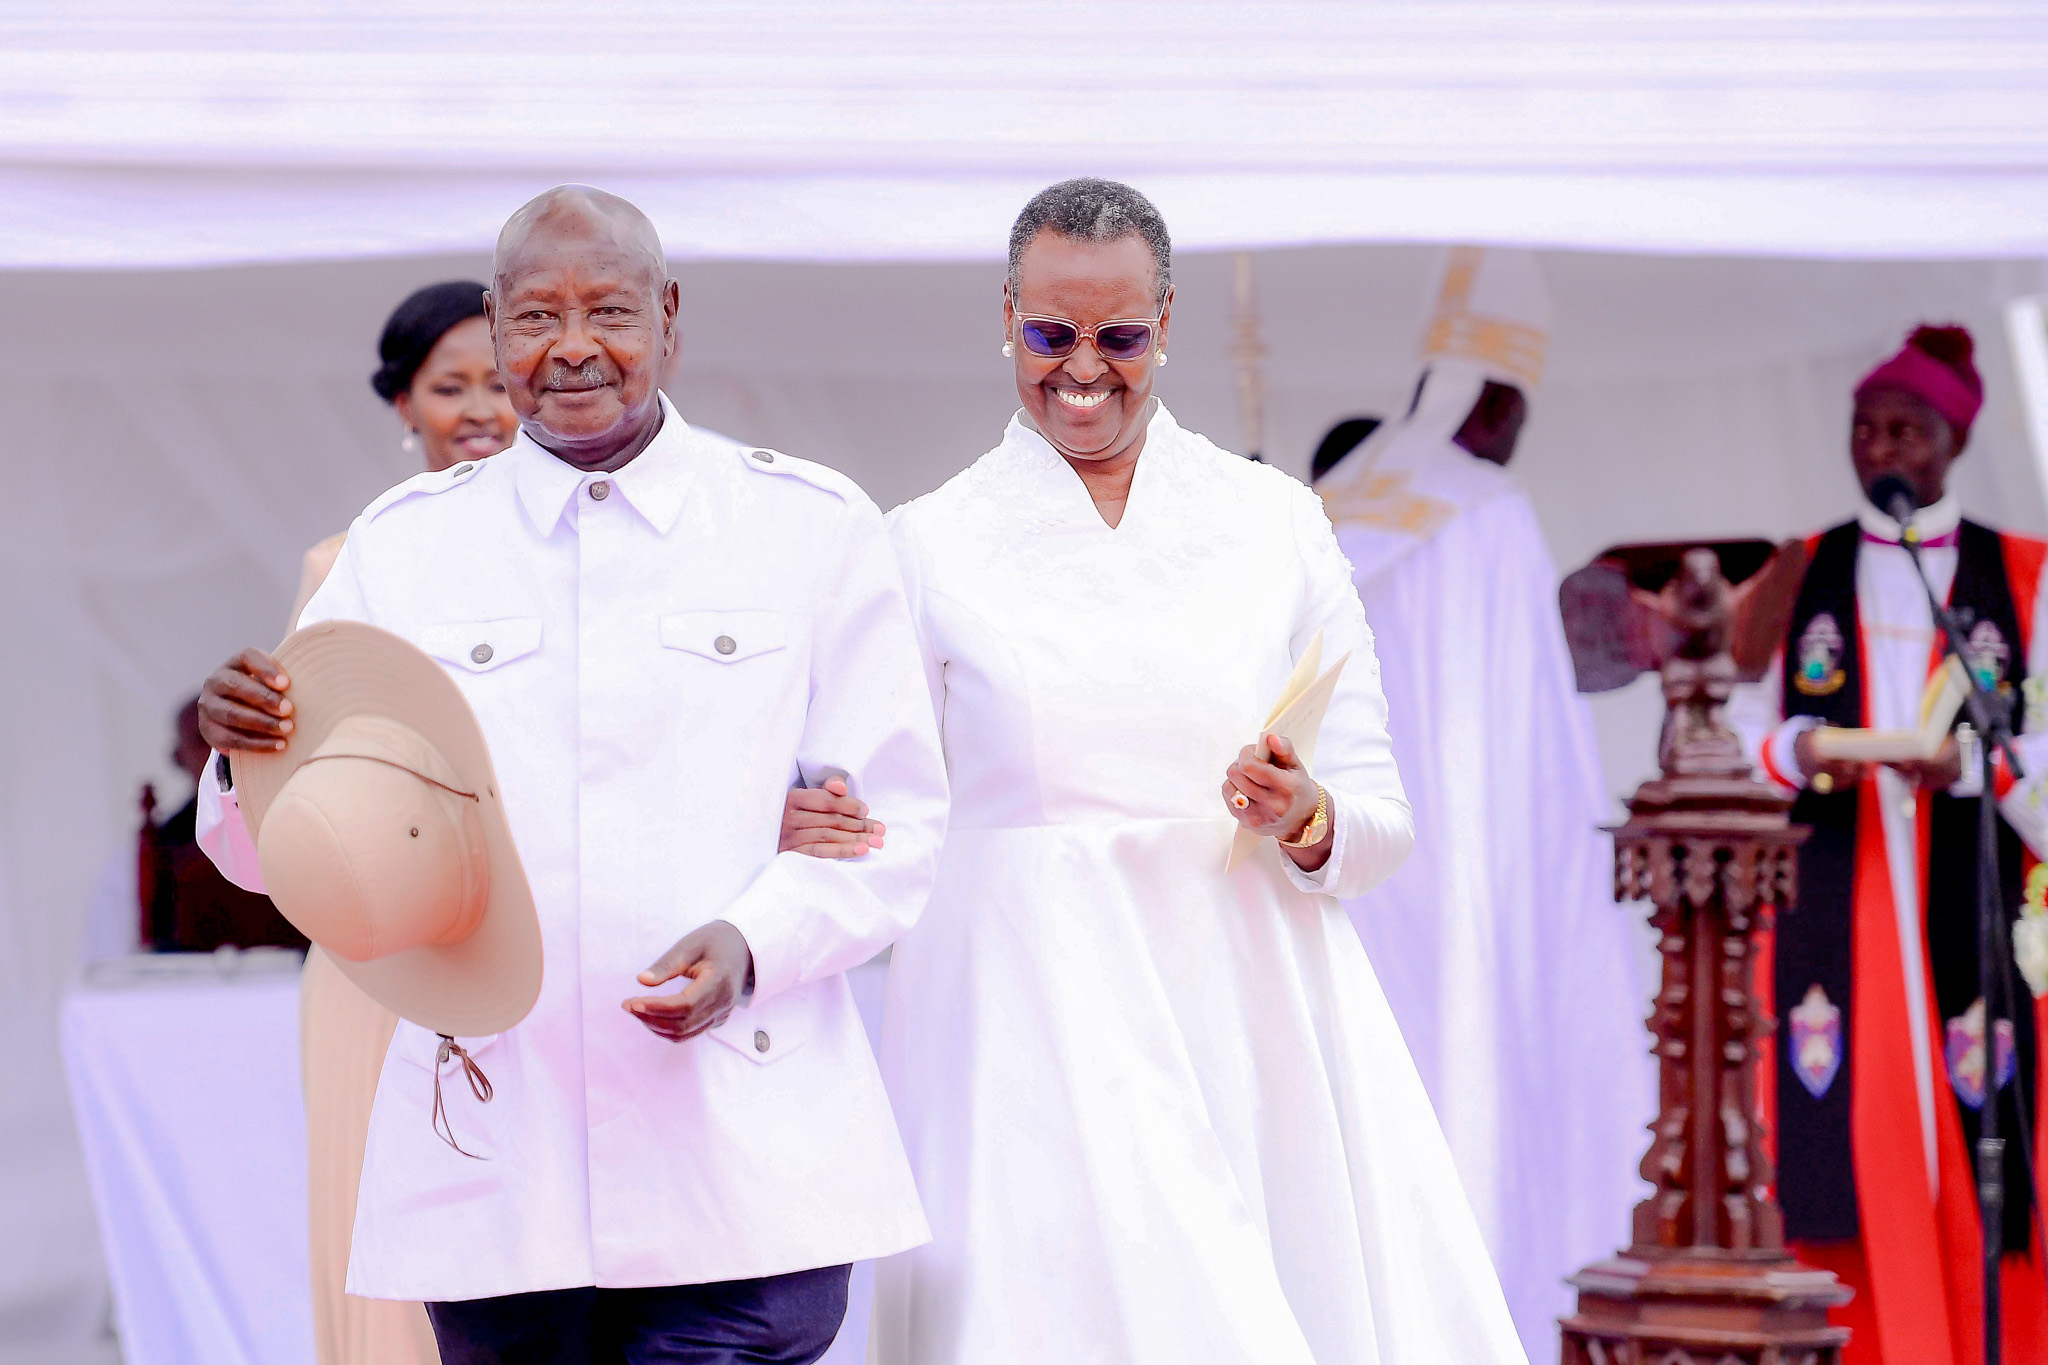 LET THEM BE: Janet Museveni advises wives on how to treat Husbands for Successful Marriages